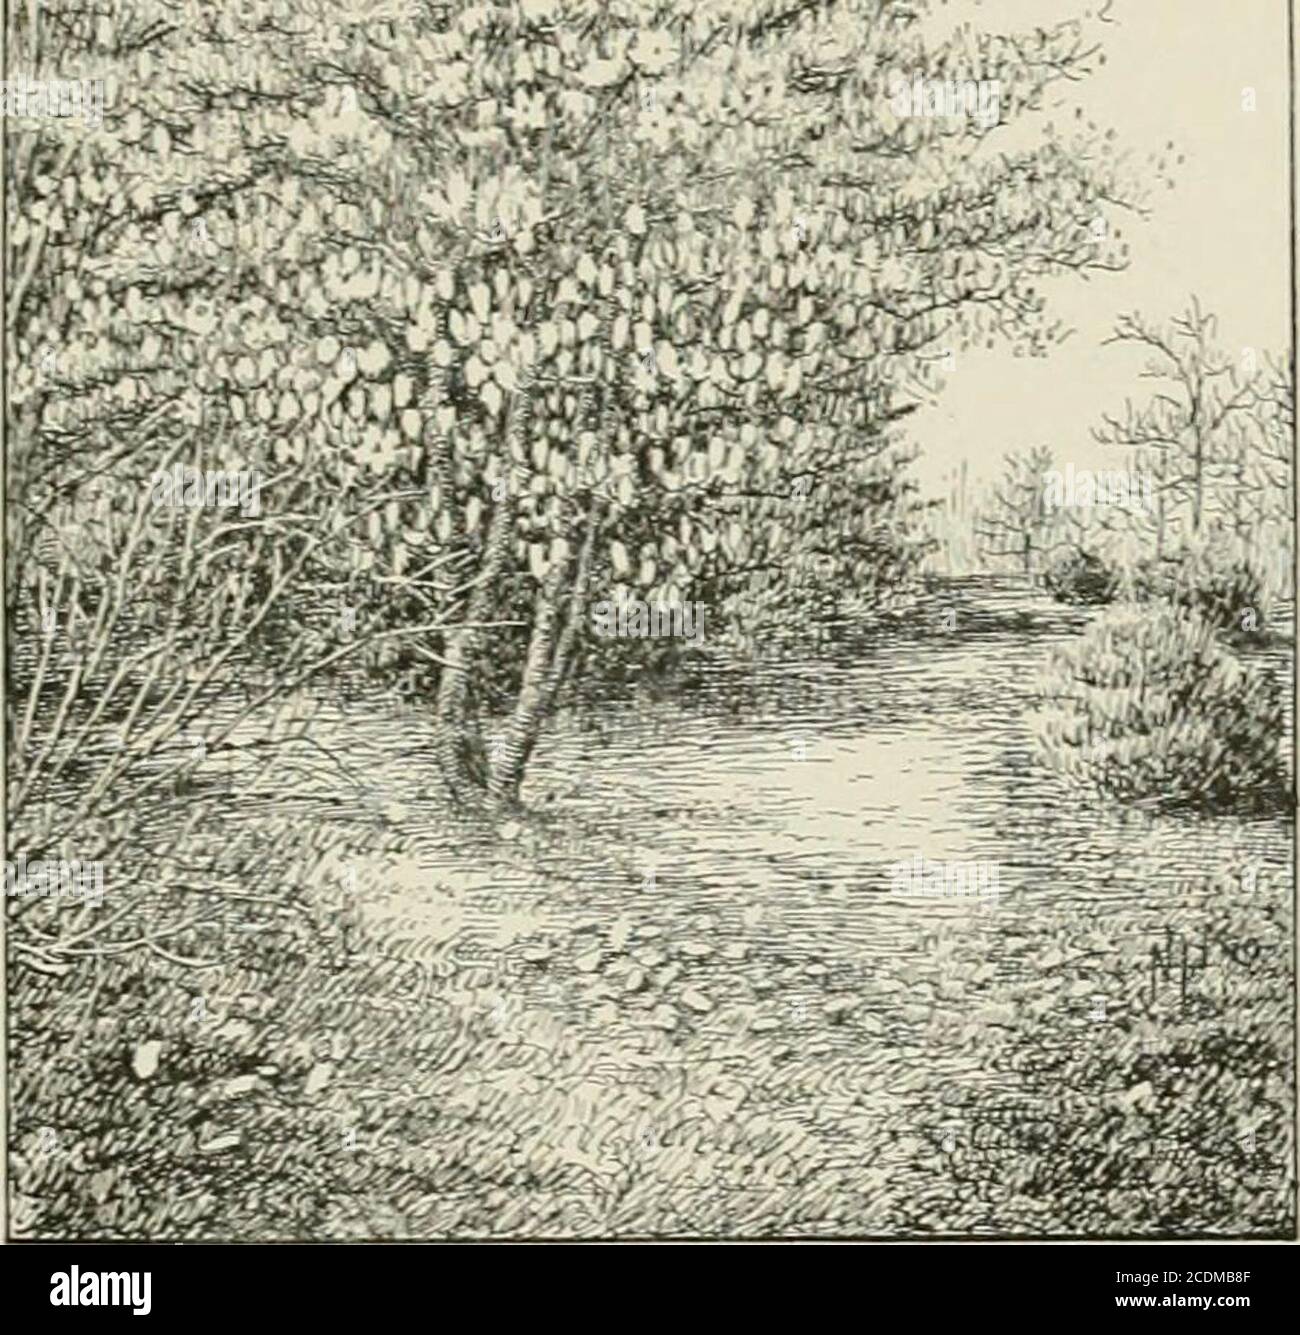 . Lawns and gardens. How to plant and beautify the home lot, the pleasure ground and garden . S — ?. FIG. 10Z—CHINESE MAGNOLIA MAGNOLIA CONSPICUA). Sweet Bay, Magnolia glatica.—A small American tree,very fine when cultivated, growing in swamps and lowgrounds generally. It has oblong leaves, green on the uppersurface, glaucous beneath, and white fragrant flowers inearly summer. Fiue for groups and in shrubberies iu rich,not necessarily low, ground. 204 flowering XErees. Umbrella Tree, Magnolia umbrella.—This is a low orna-mental tree with broad, spreading crowns and obovate-lanceolate leaves f Stock Photo